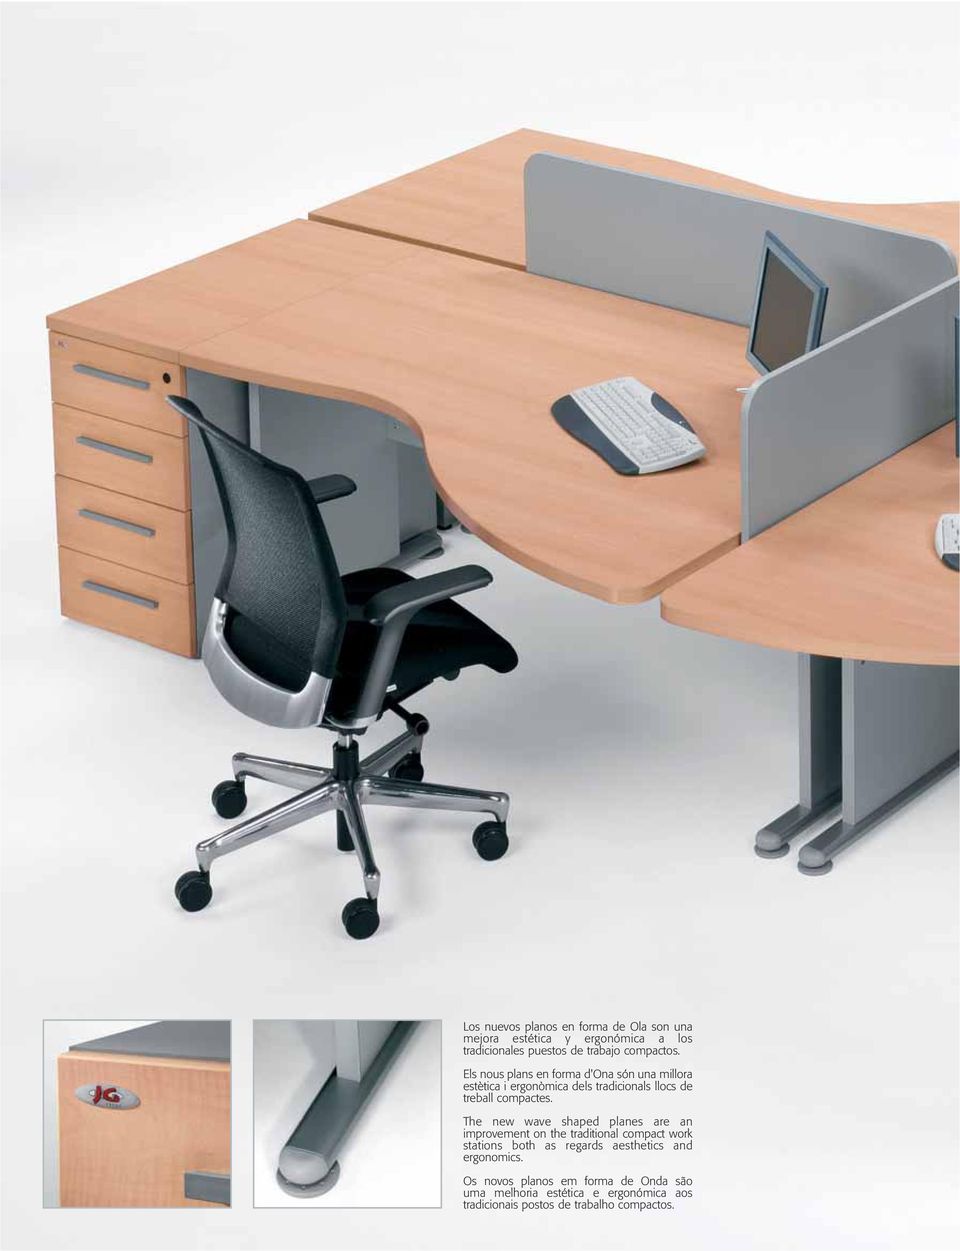 The new wave shaped planes are an improvement on the traditional compact work stations both as regards aesthetics and